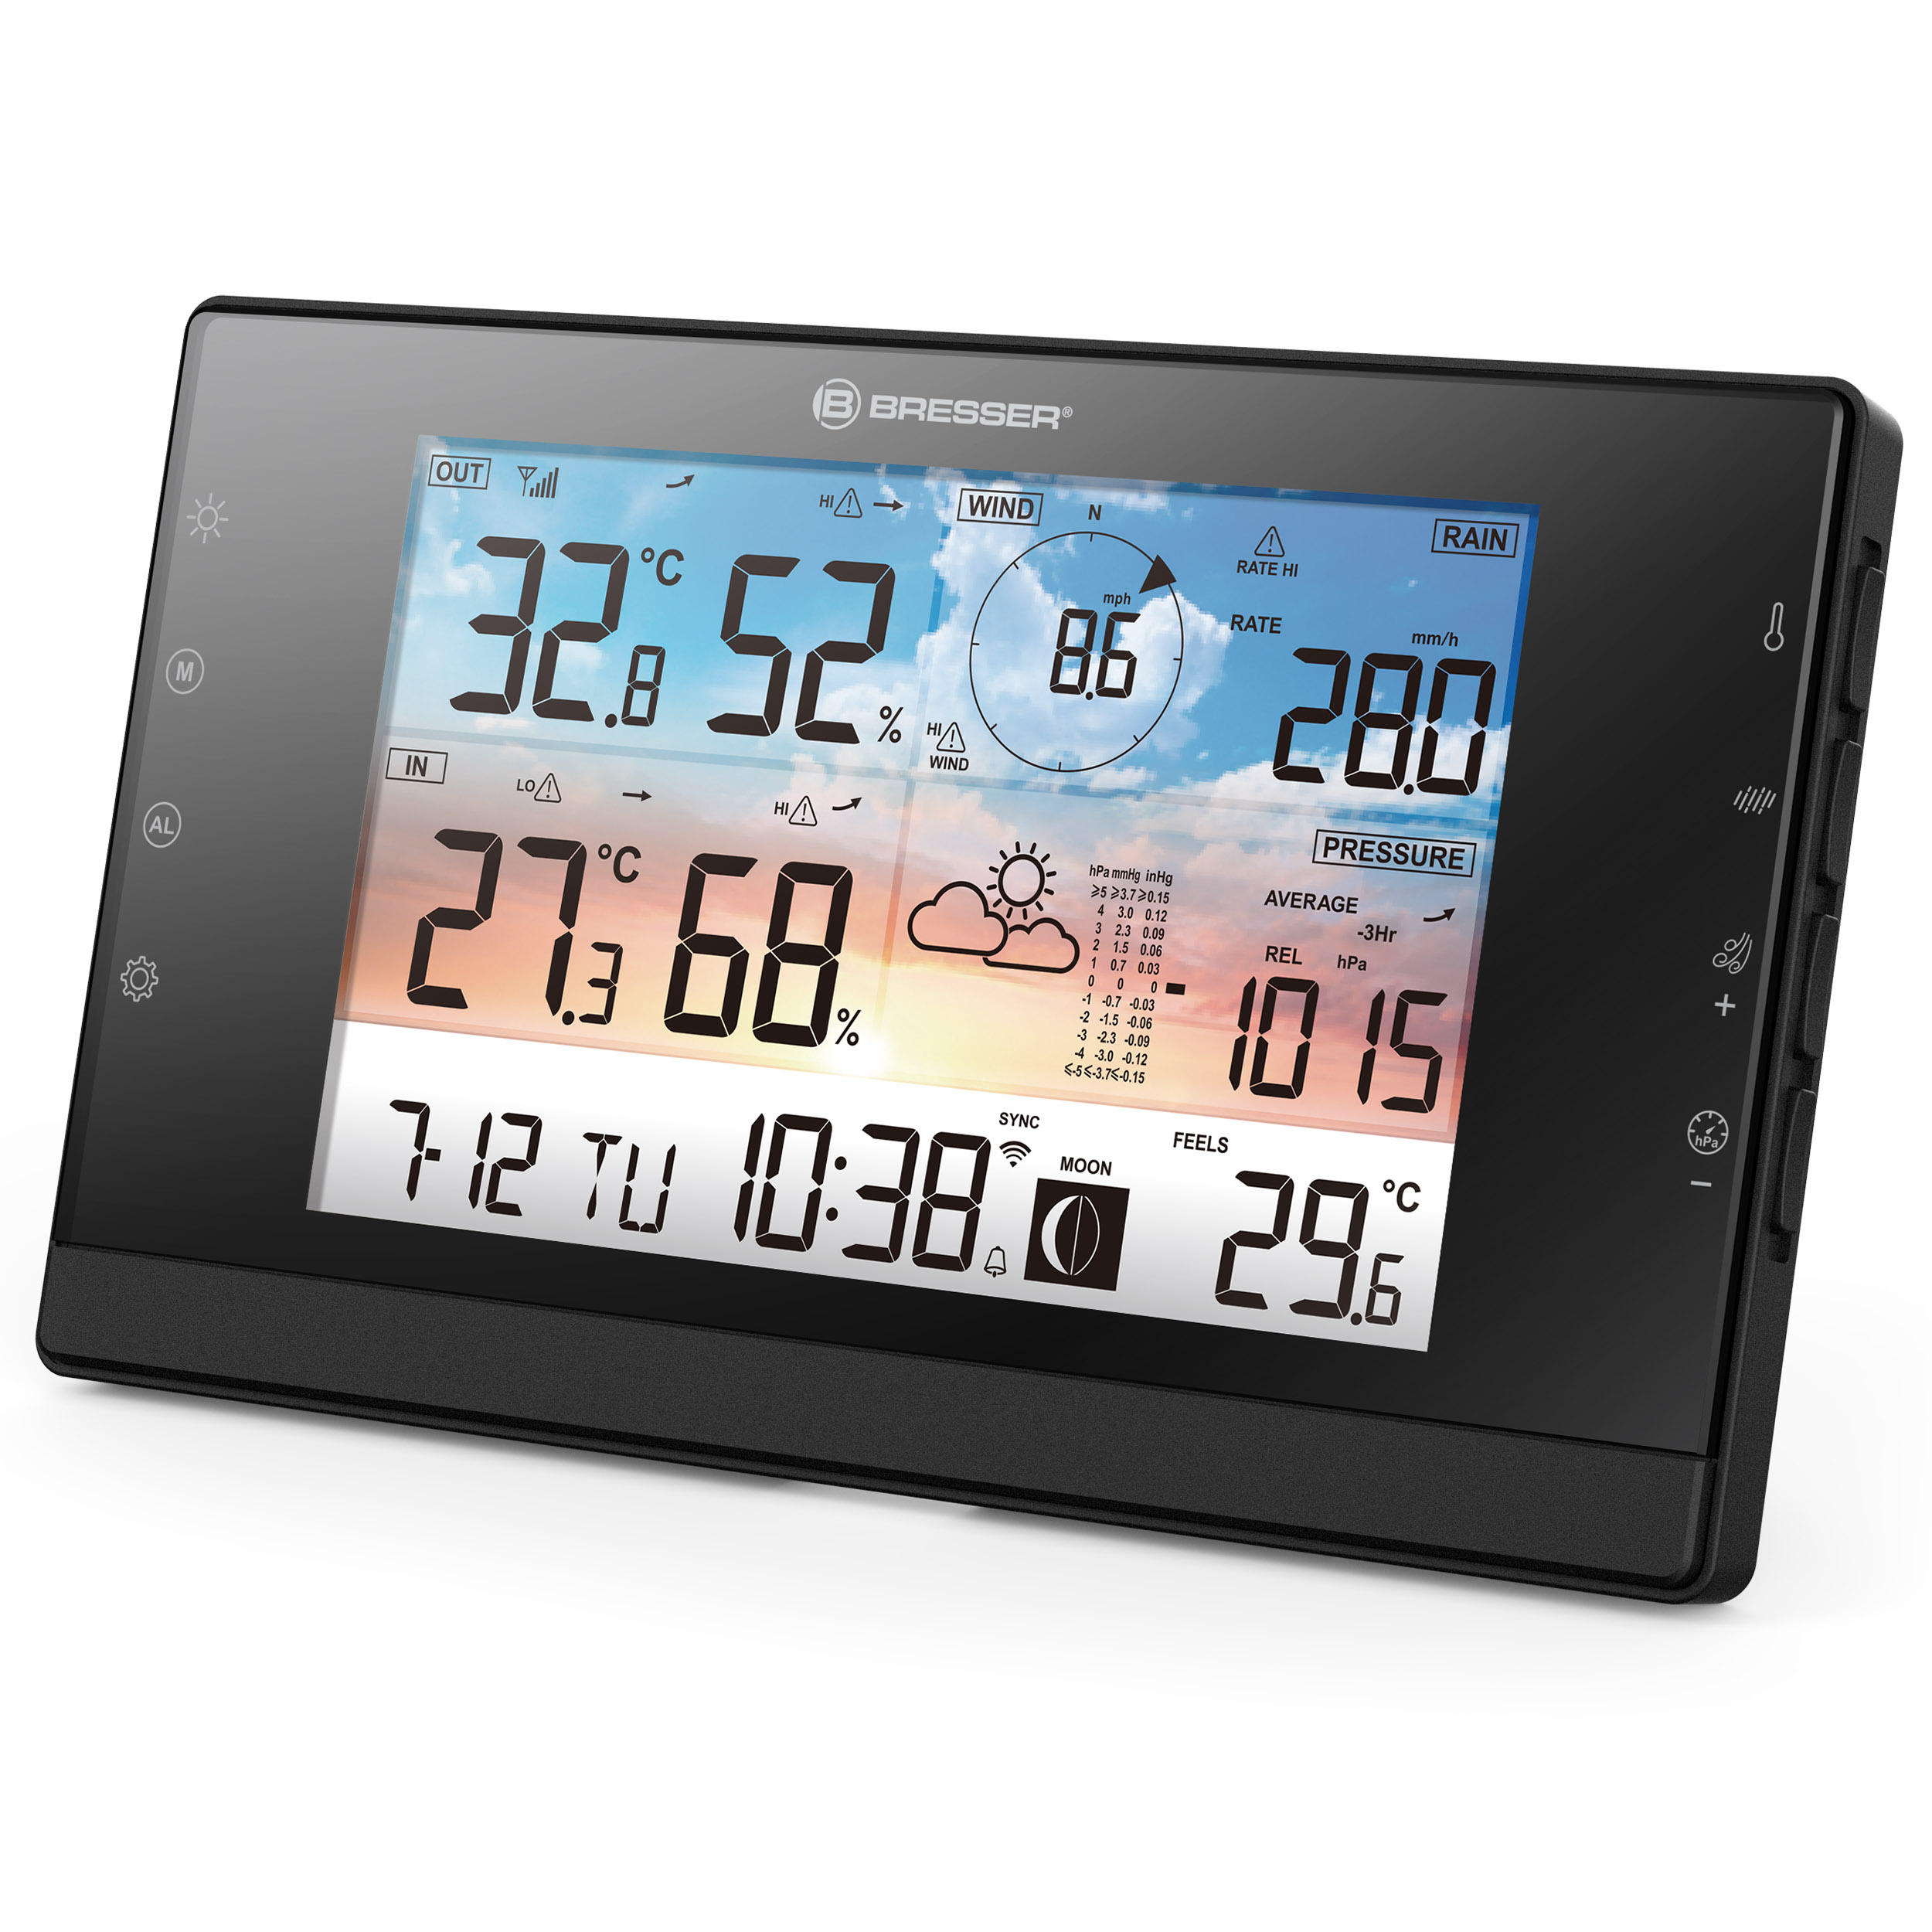 BRESSER WSC Wi-Fi Weather Station with 5-in-1 Multi-Sensor